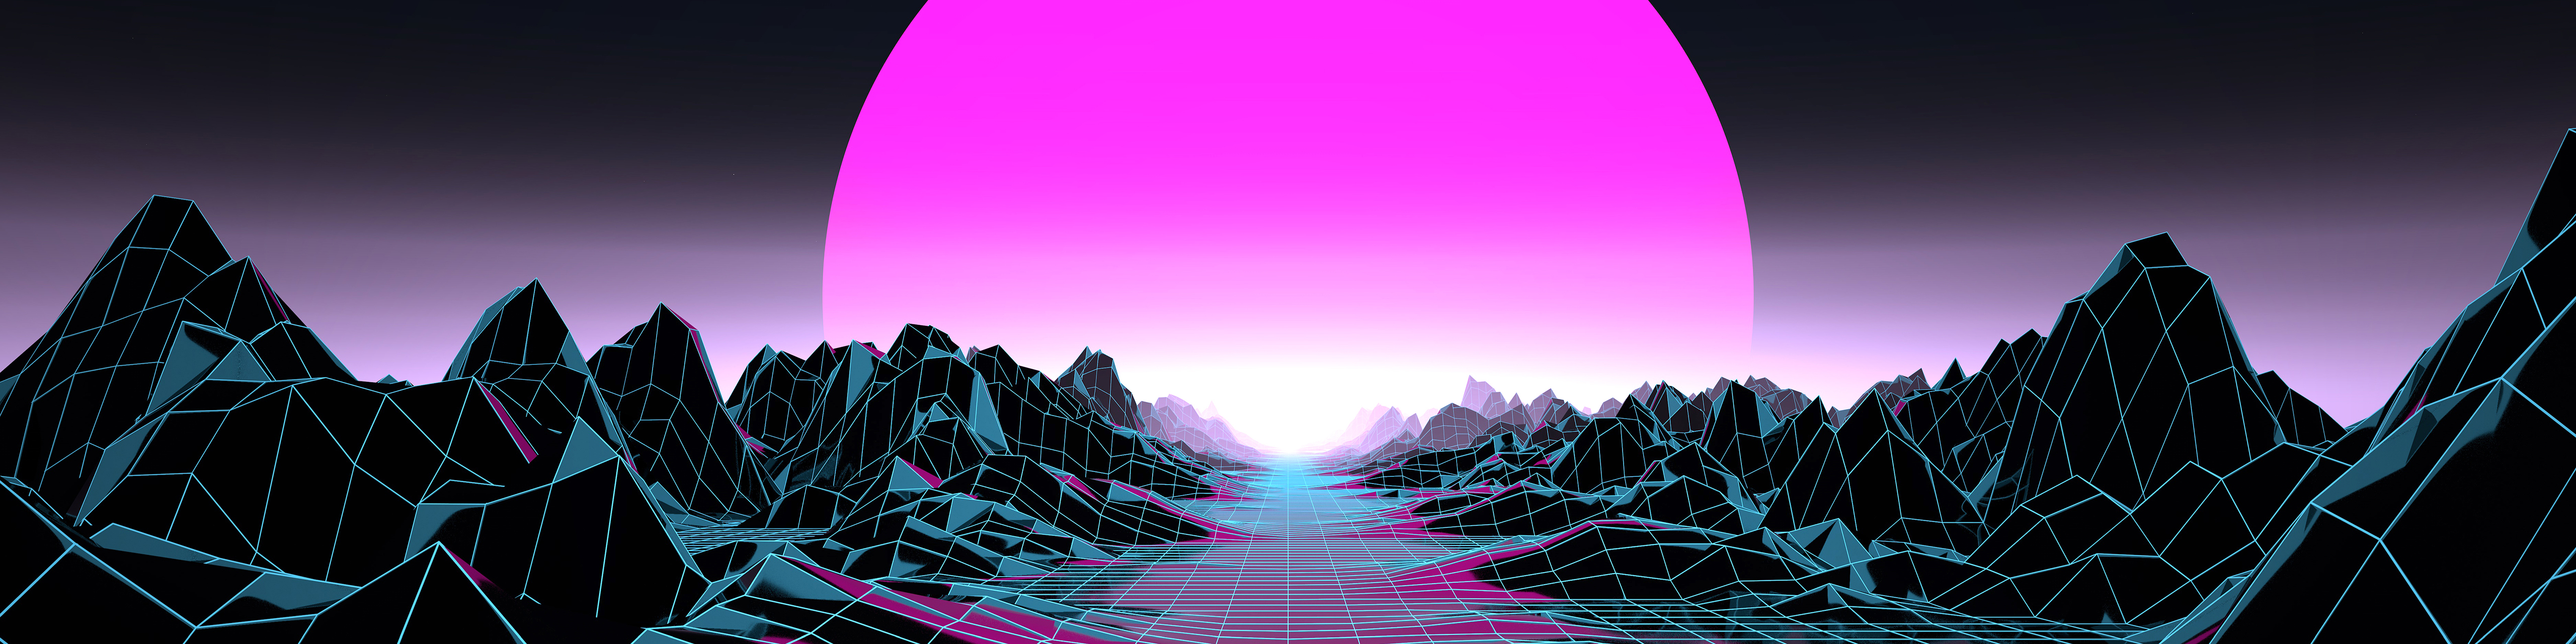 Digital graphic of a mountainous planet with a magenta sun looming in the background 